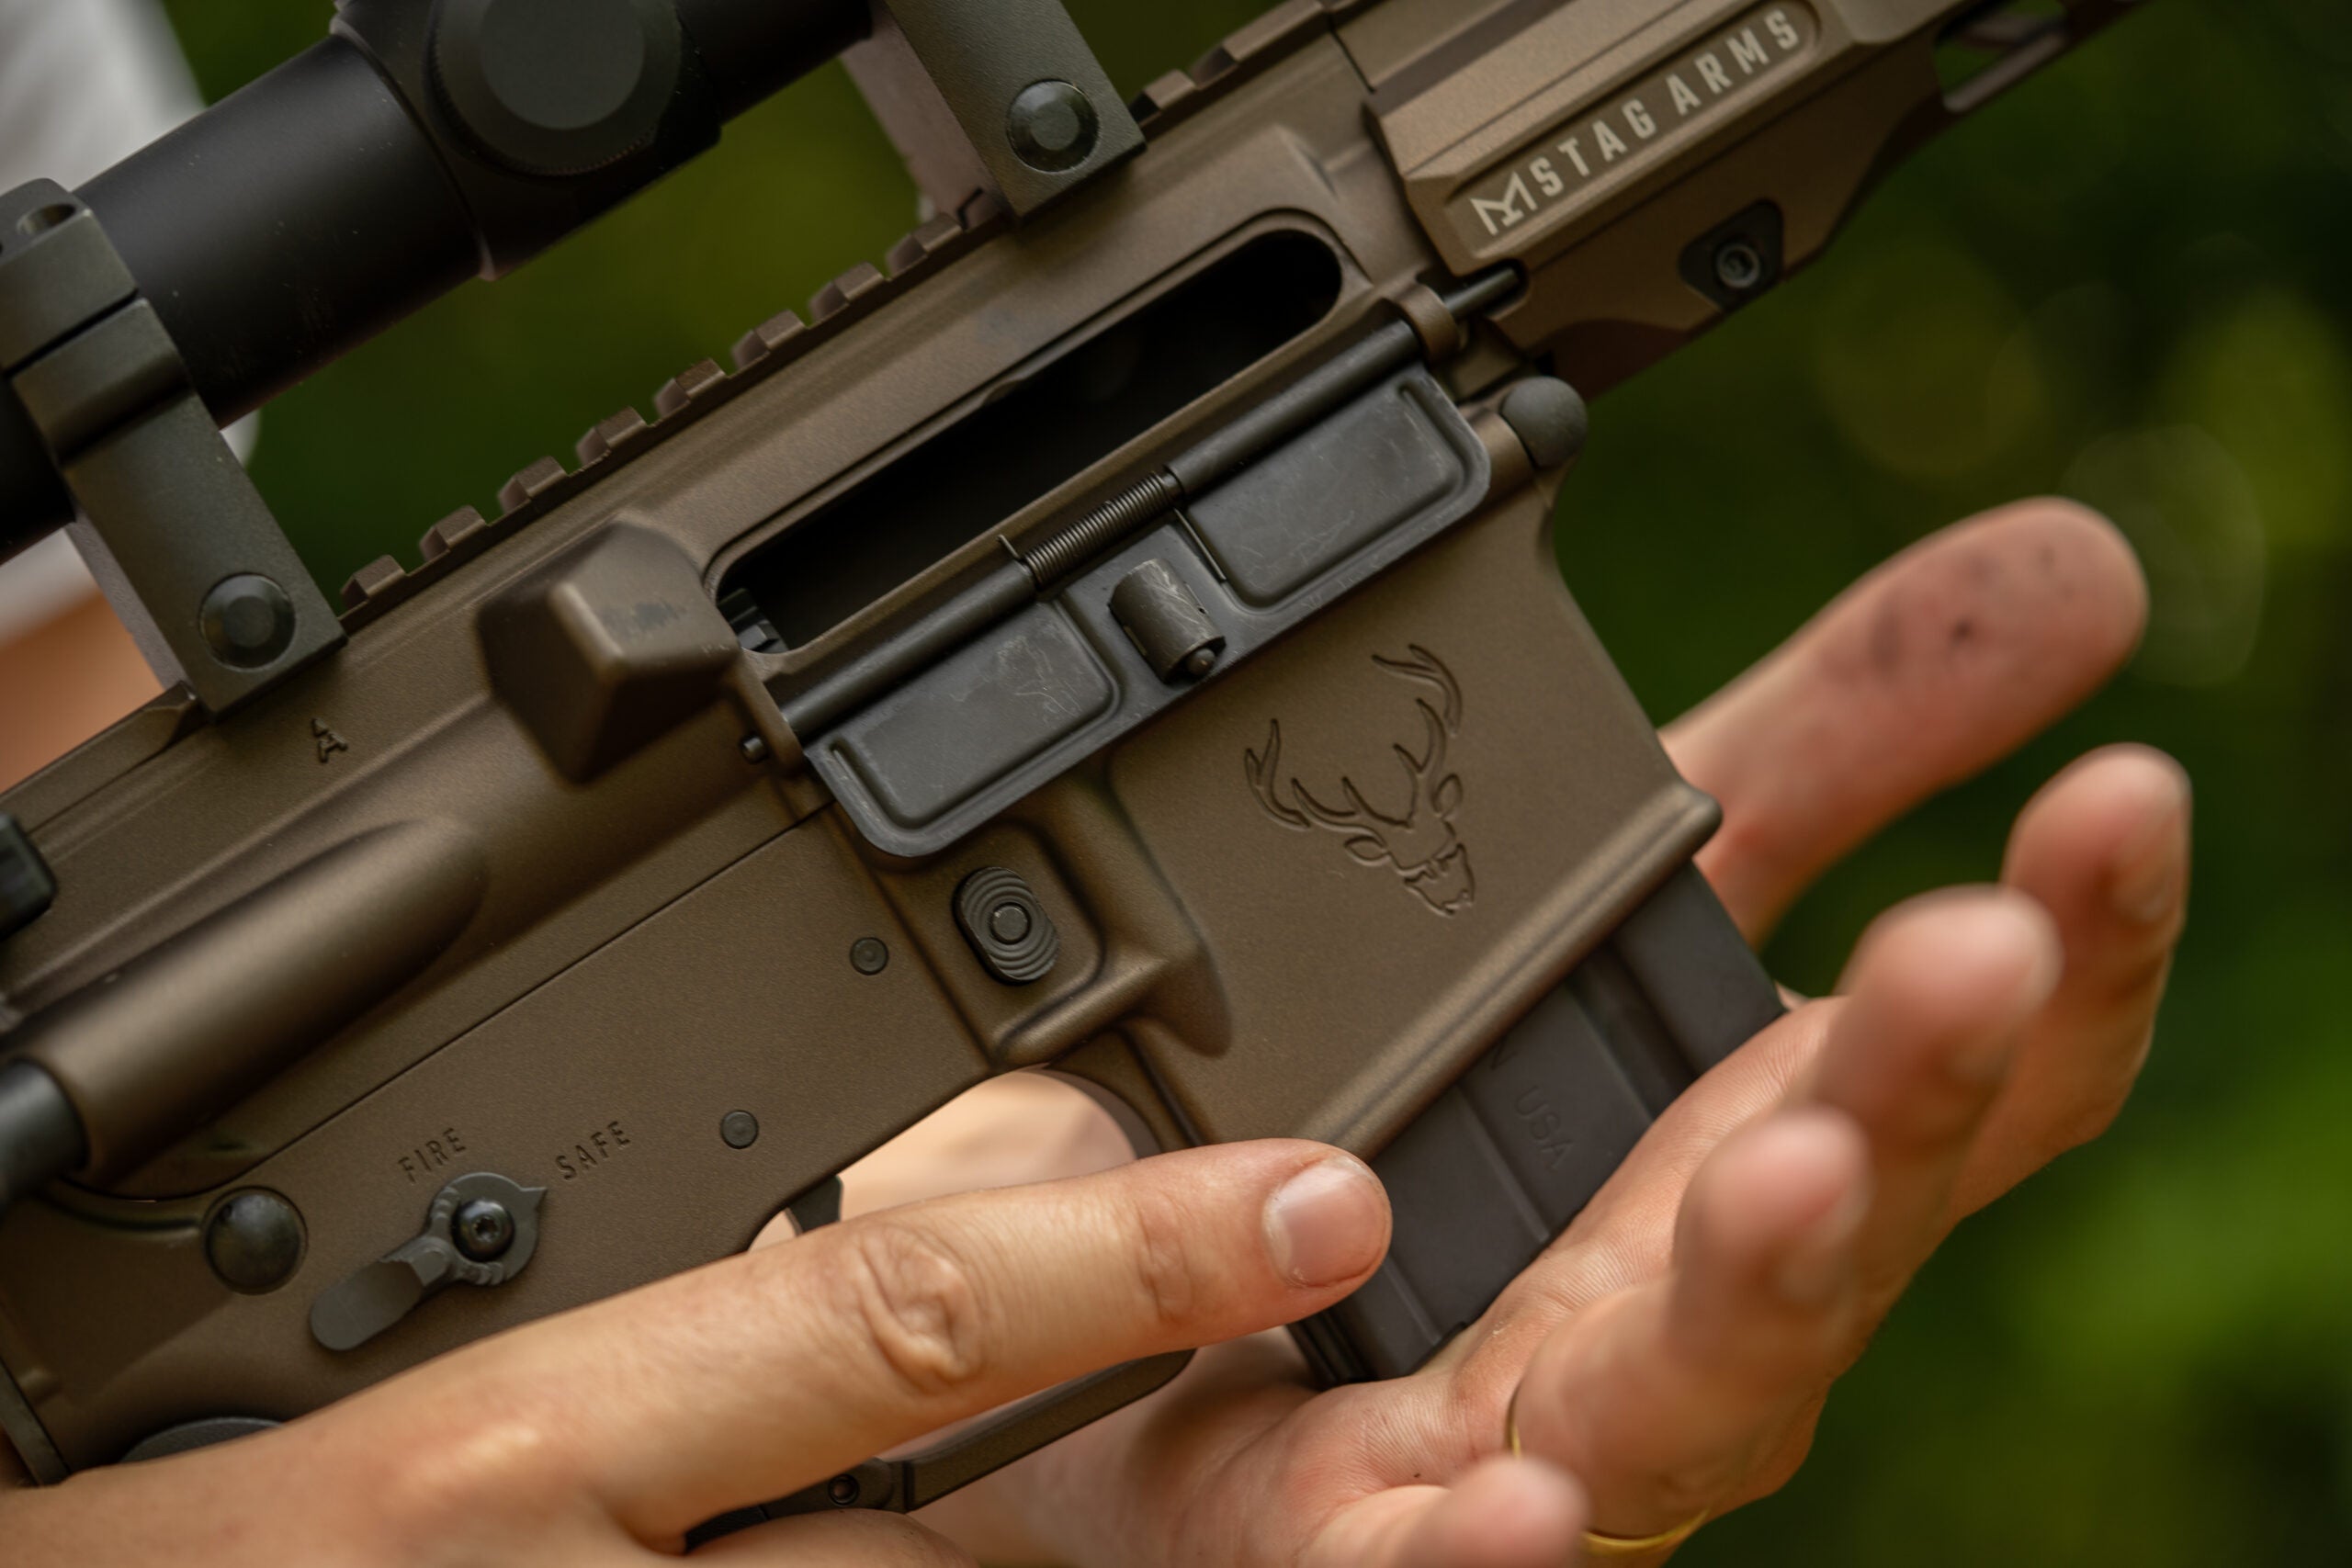 Field & Stream writer loading a magazine into a Stag 15 Pursuit rifle during a product review